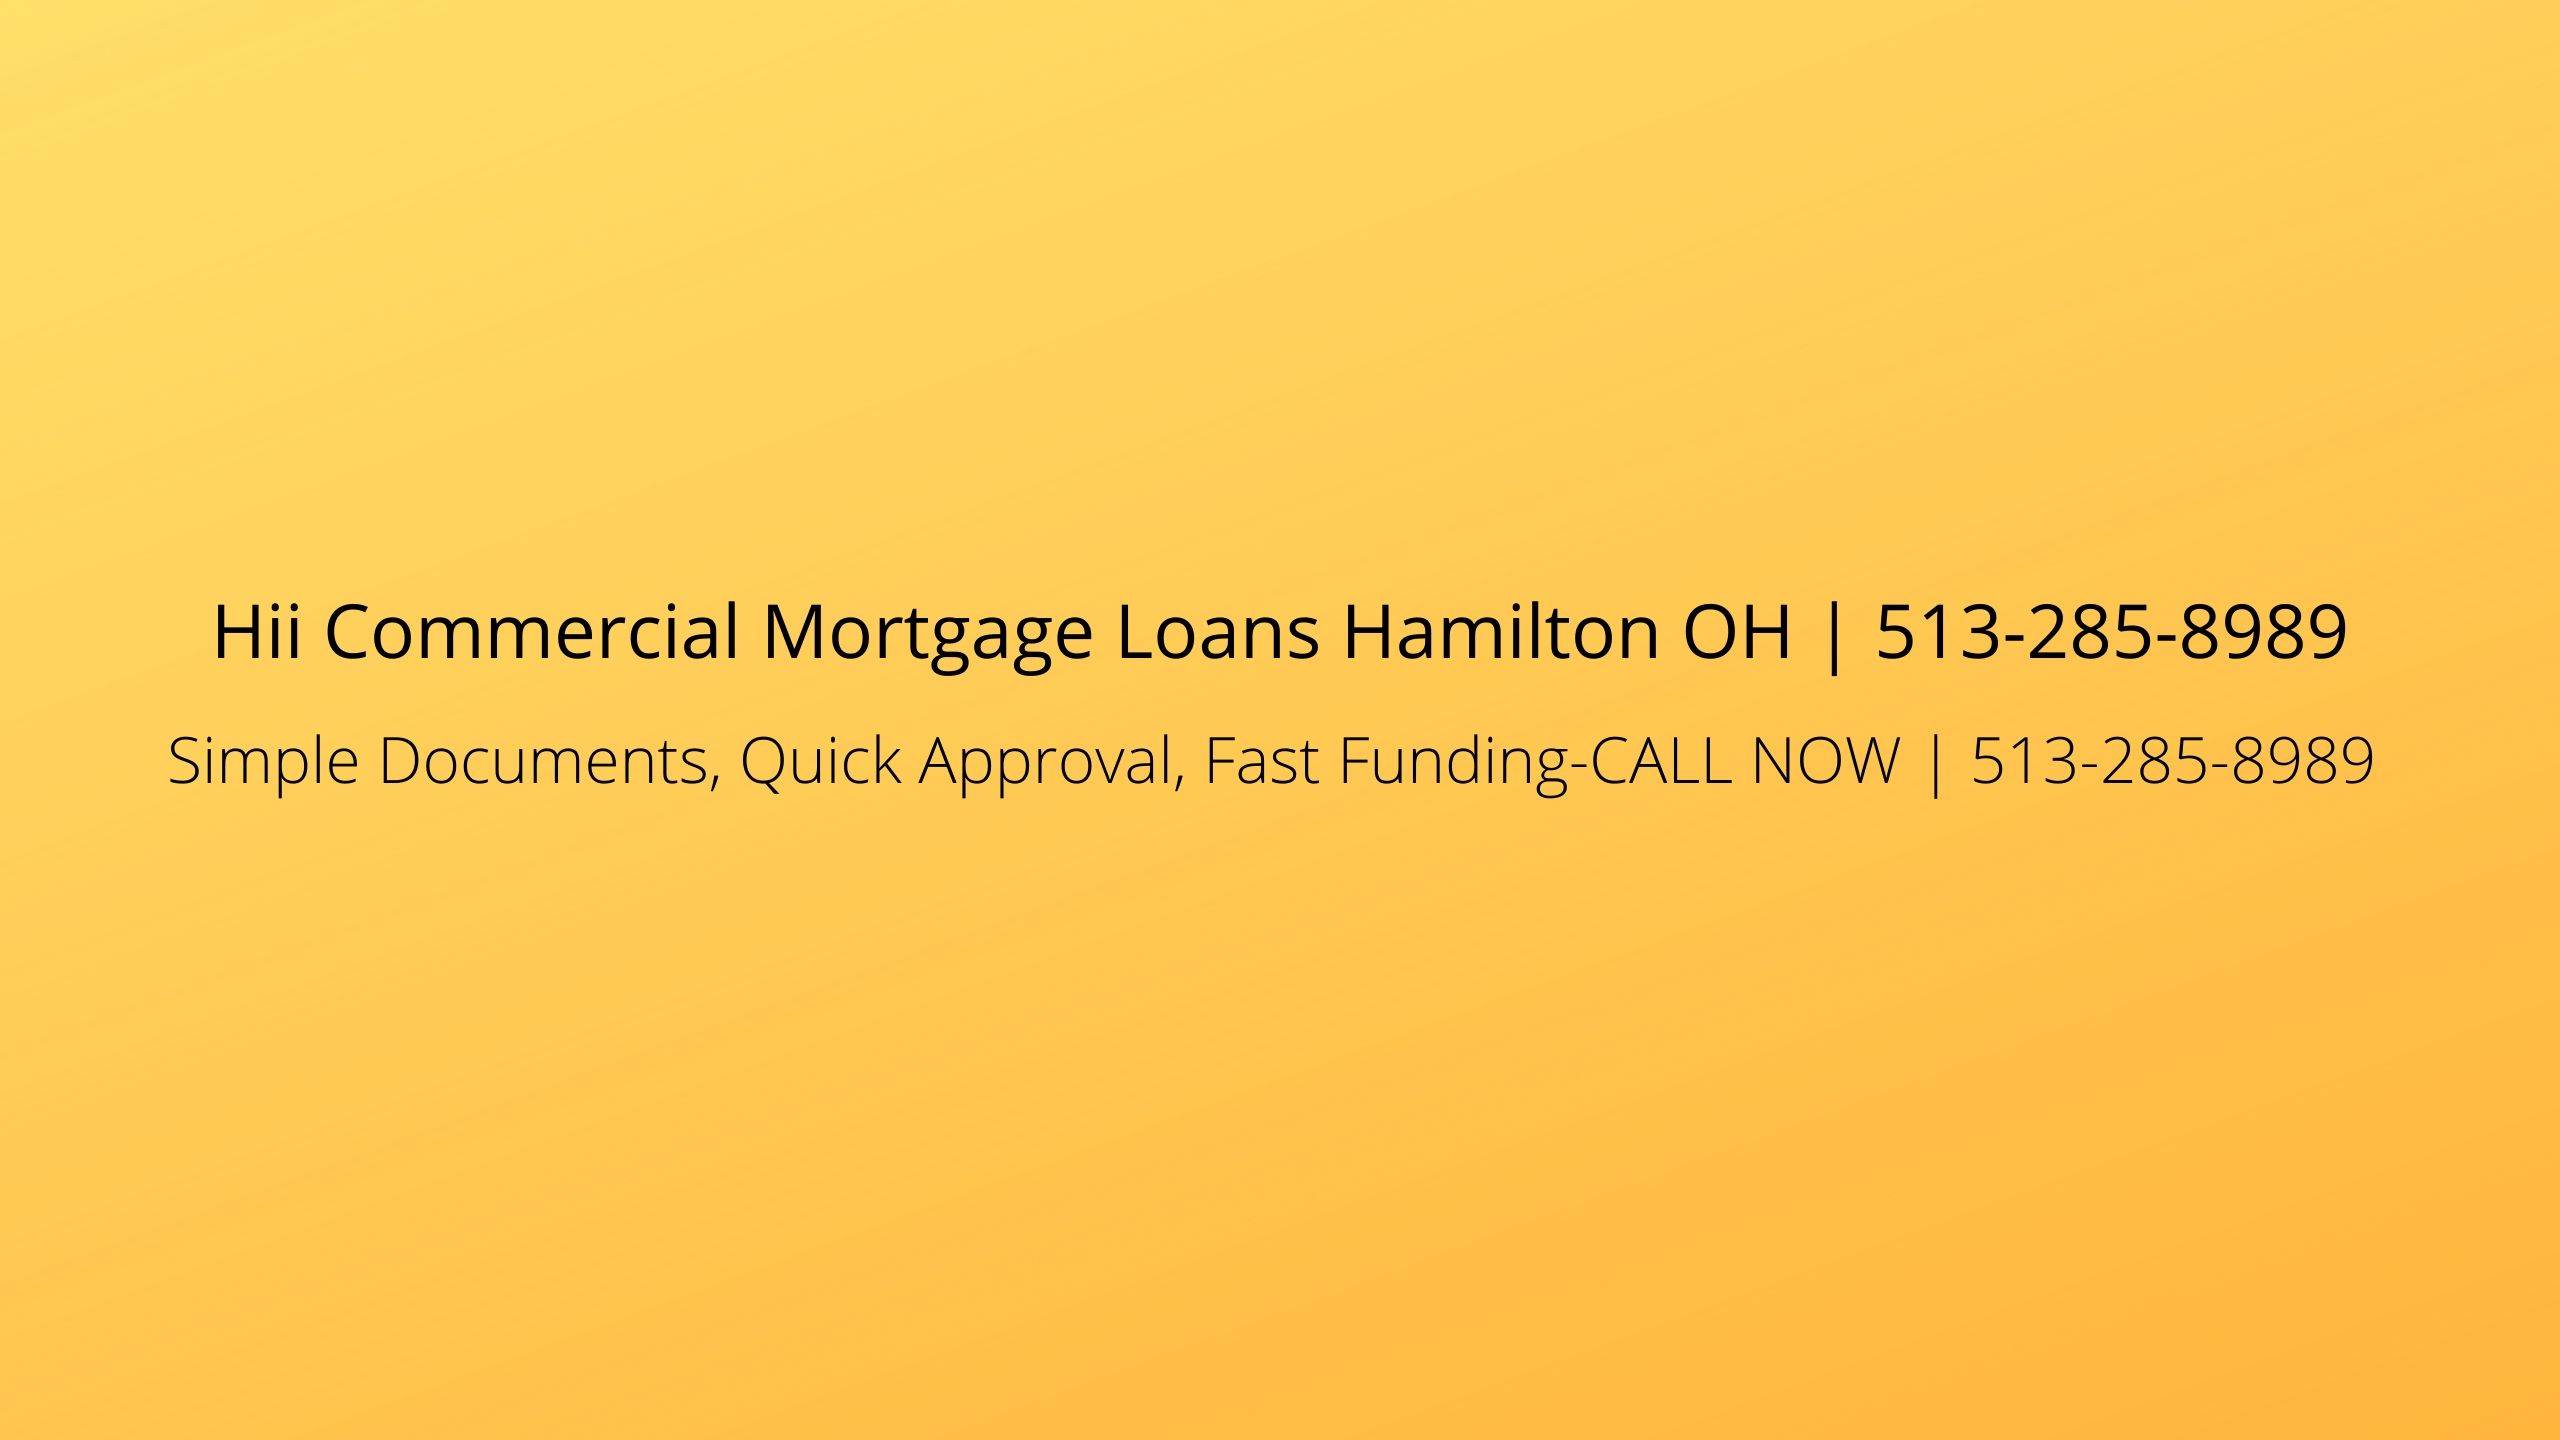 Hii Commercial Mortgage Loans Hamilton OH